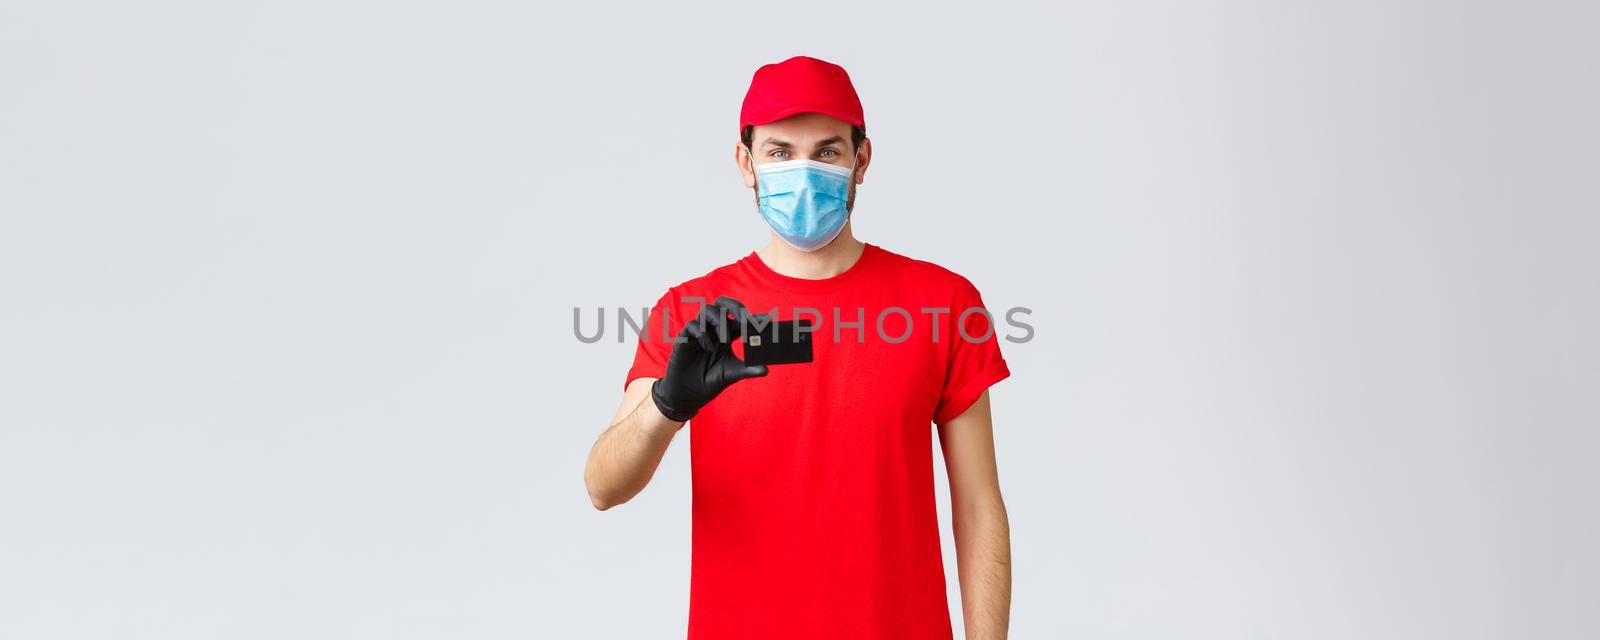 Contactless delivery, payment and online shopping during covid-19, self-quarantine. Handsome courier in red uniform, cap, medical face mask and gloves, show credit card, order internet.